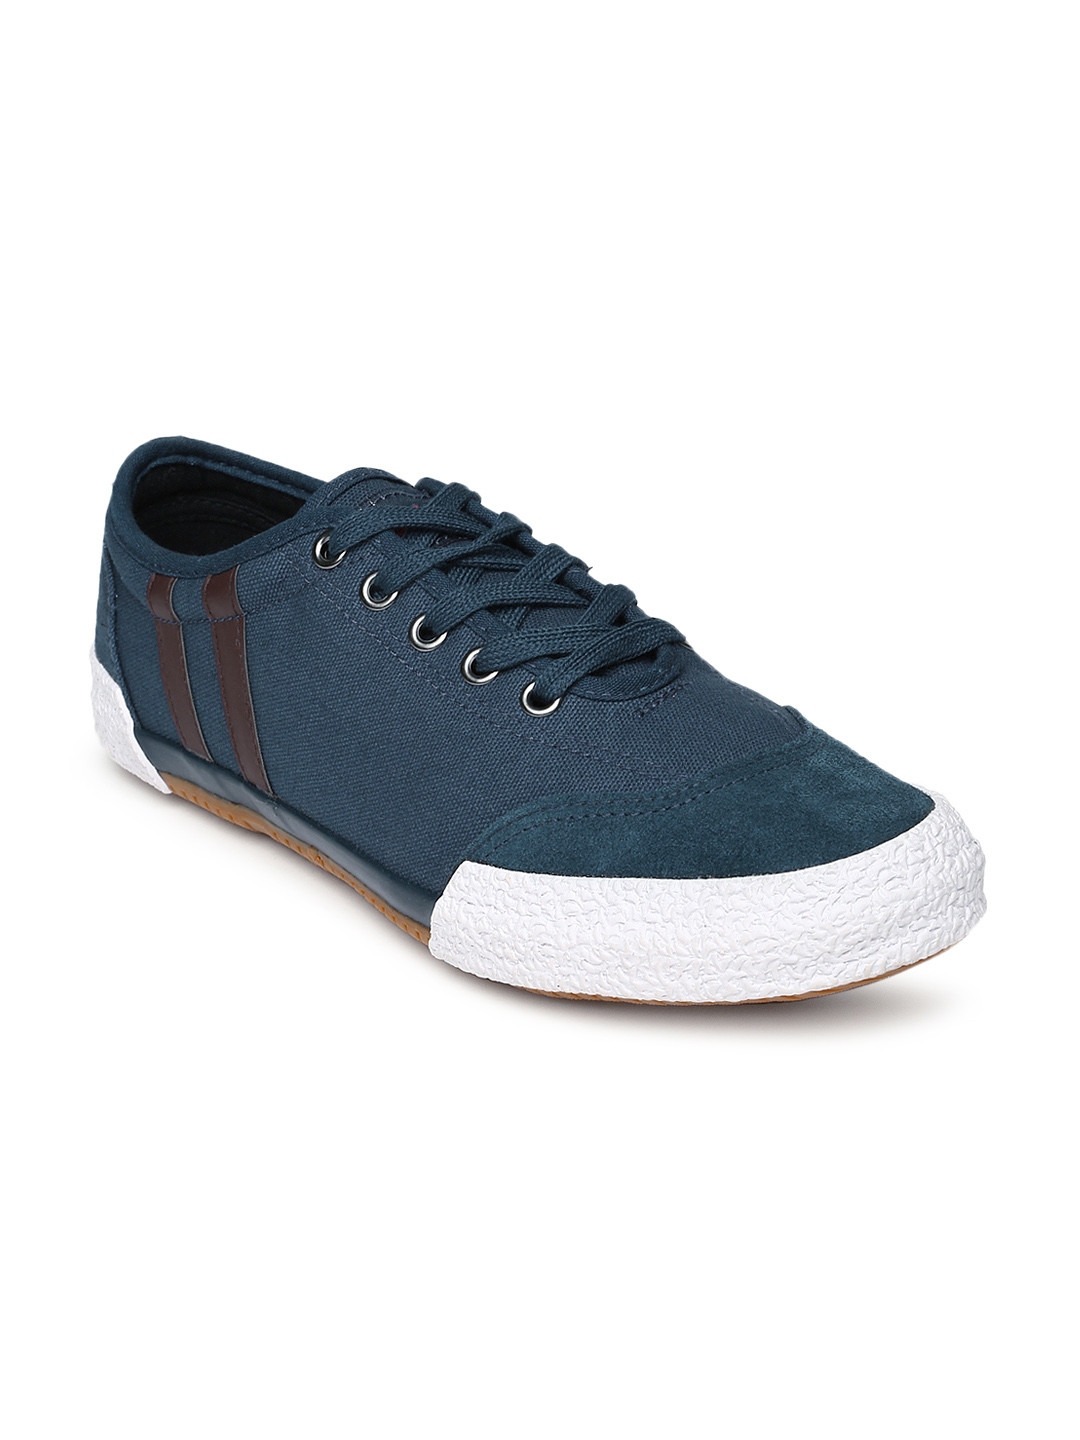 Buy Roadster Men Navy Casual Shoes - Casual Shoes for Men 870921 | Myntra